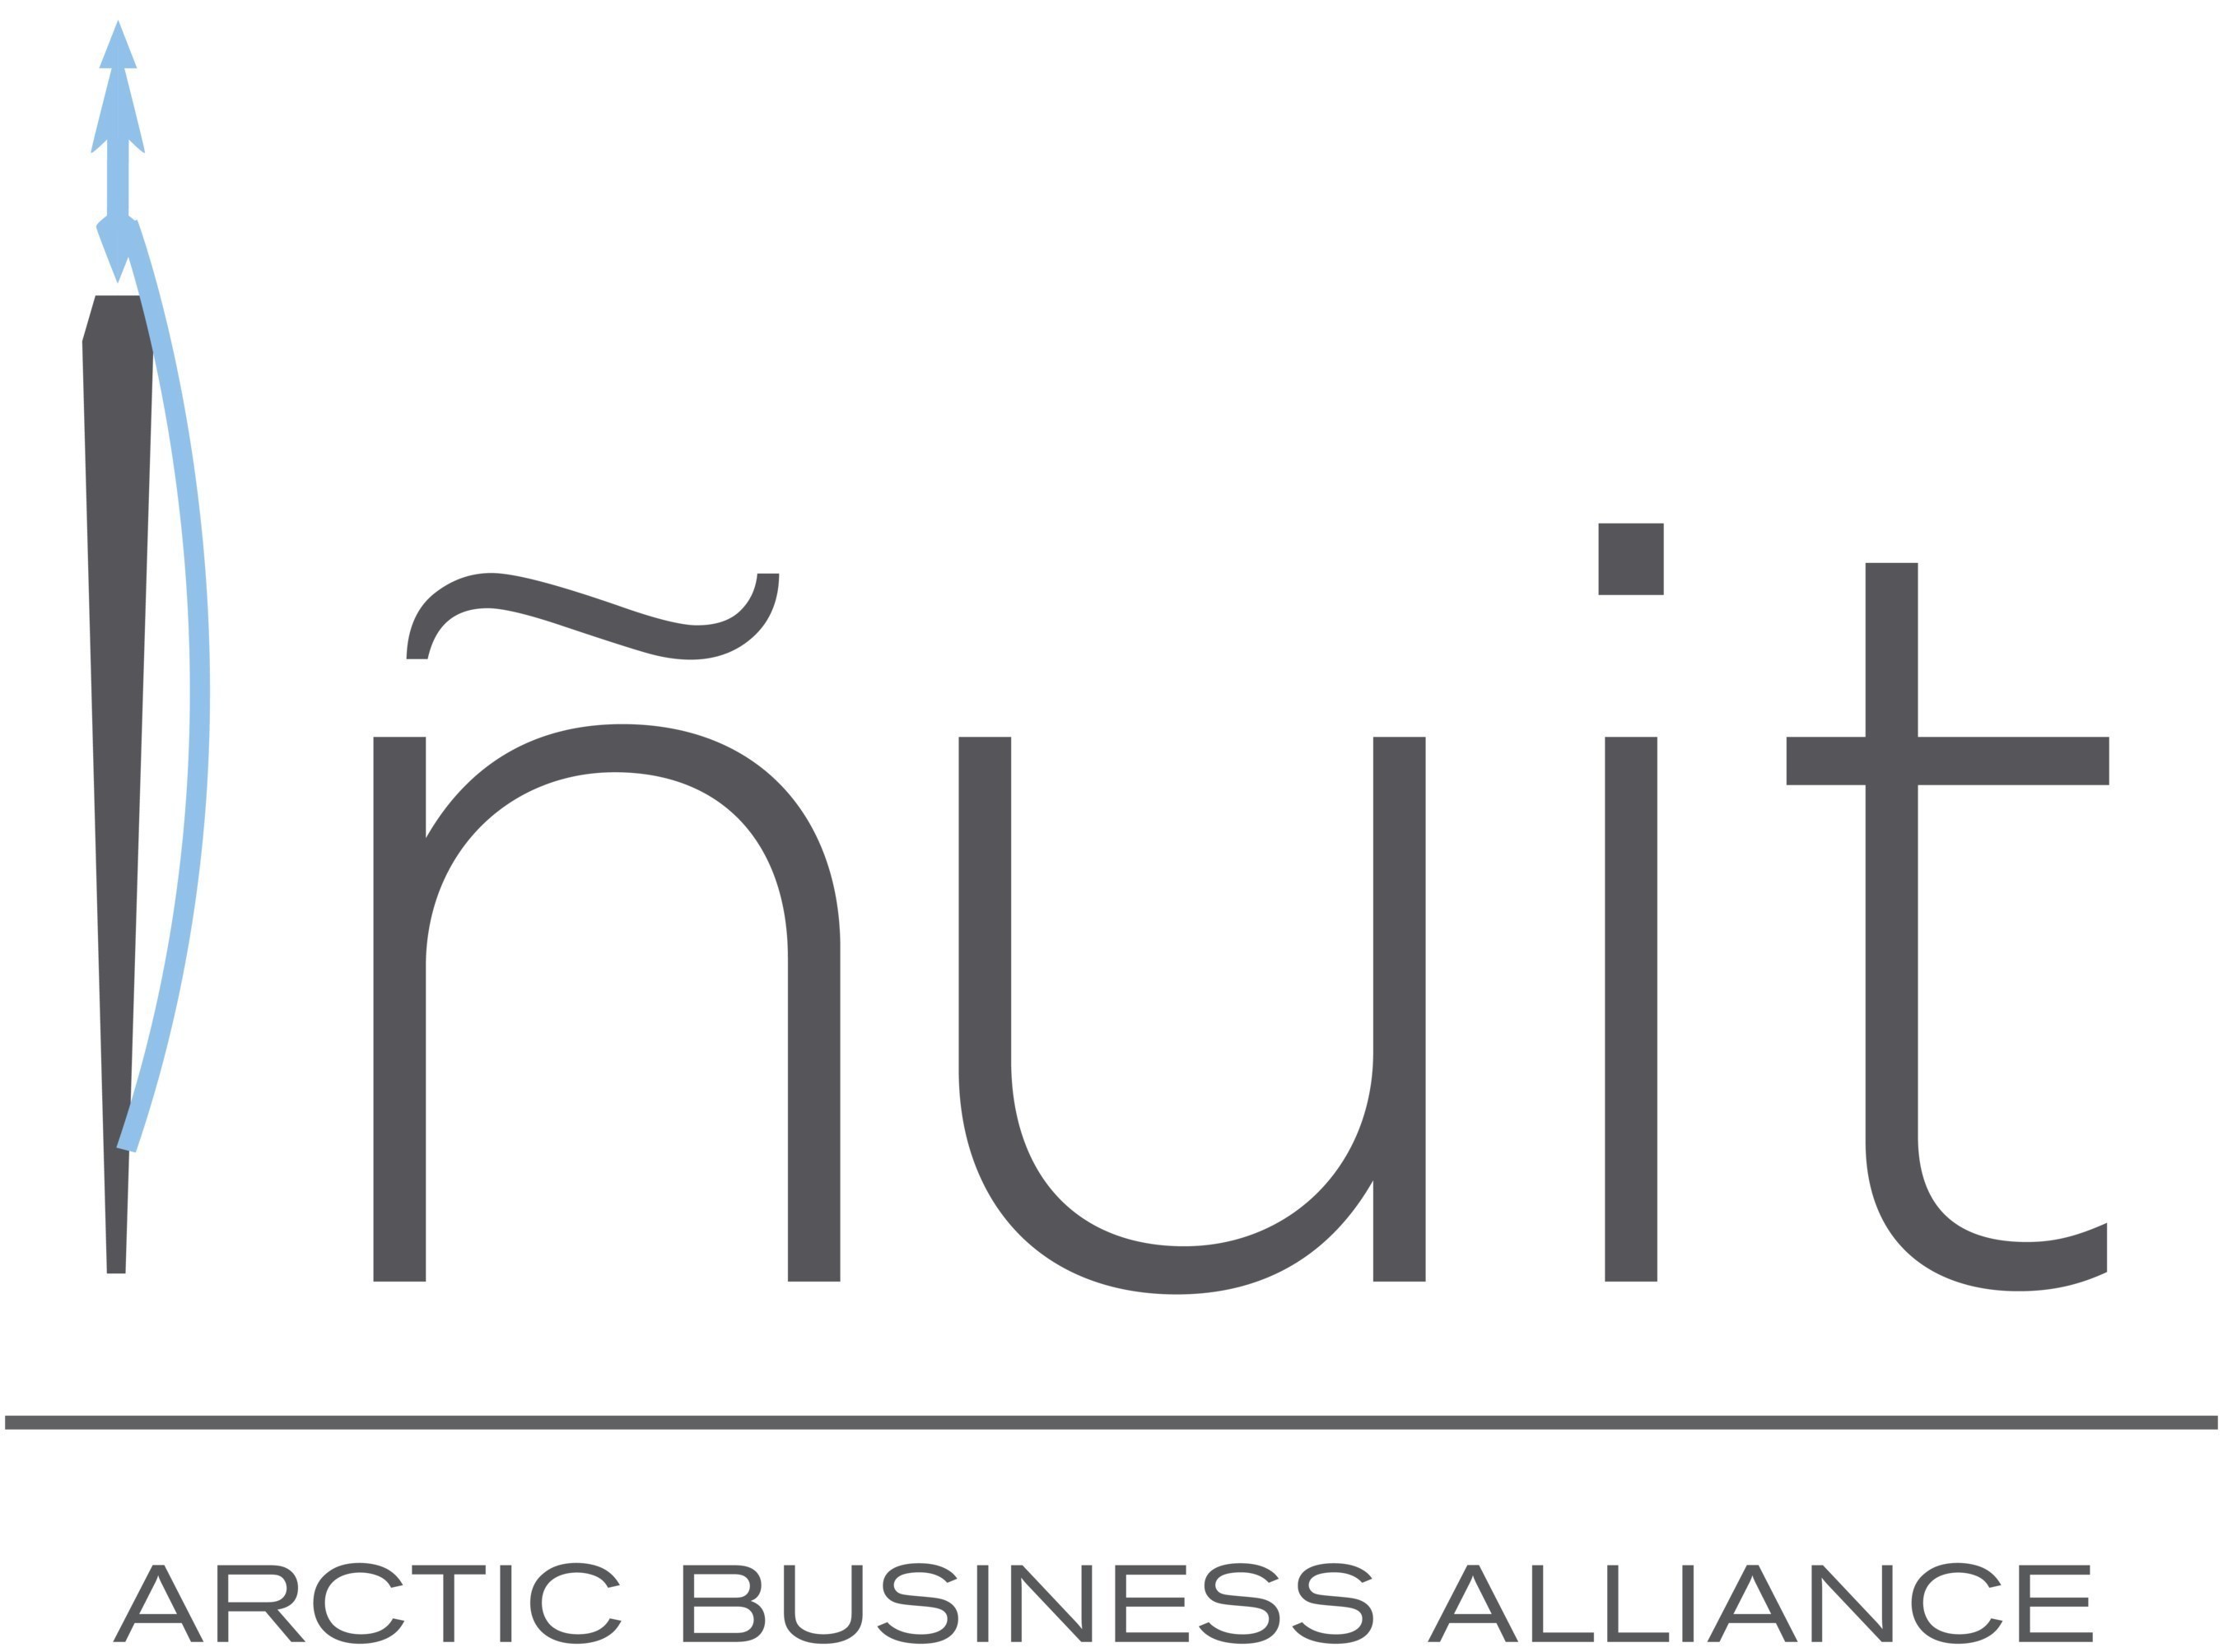 Formation of Inuit Arctic Business Alliance